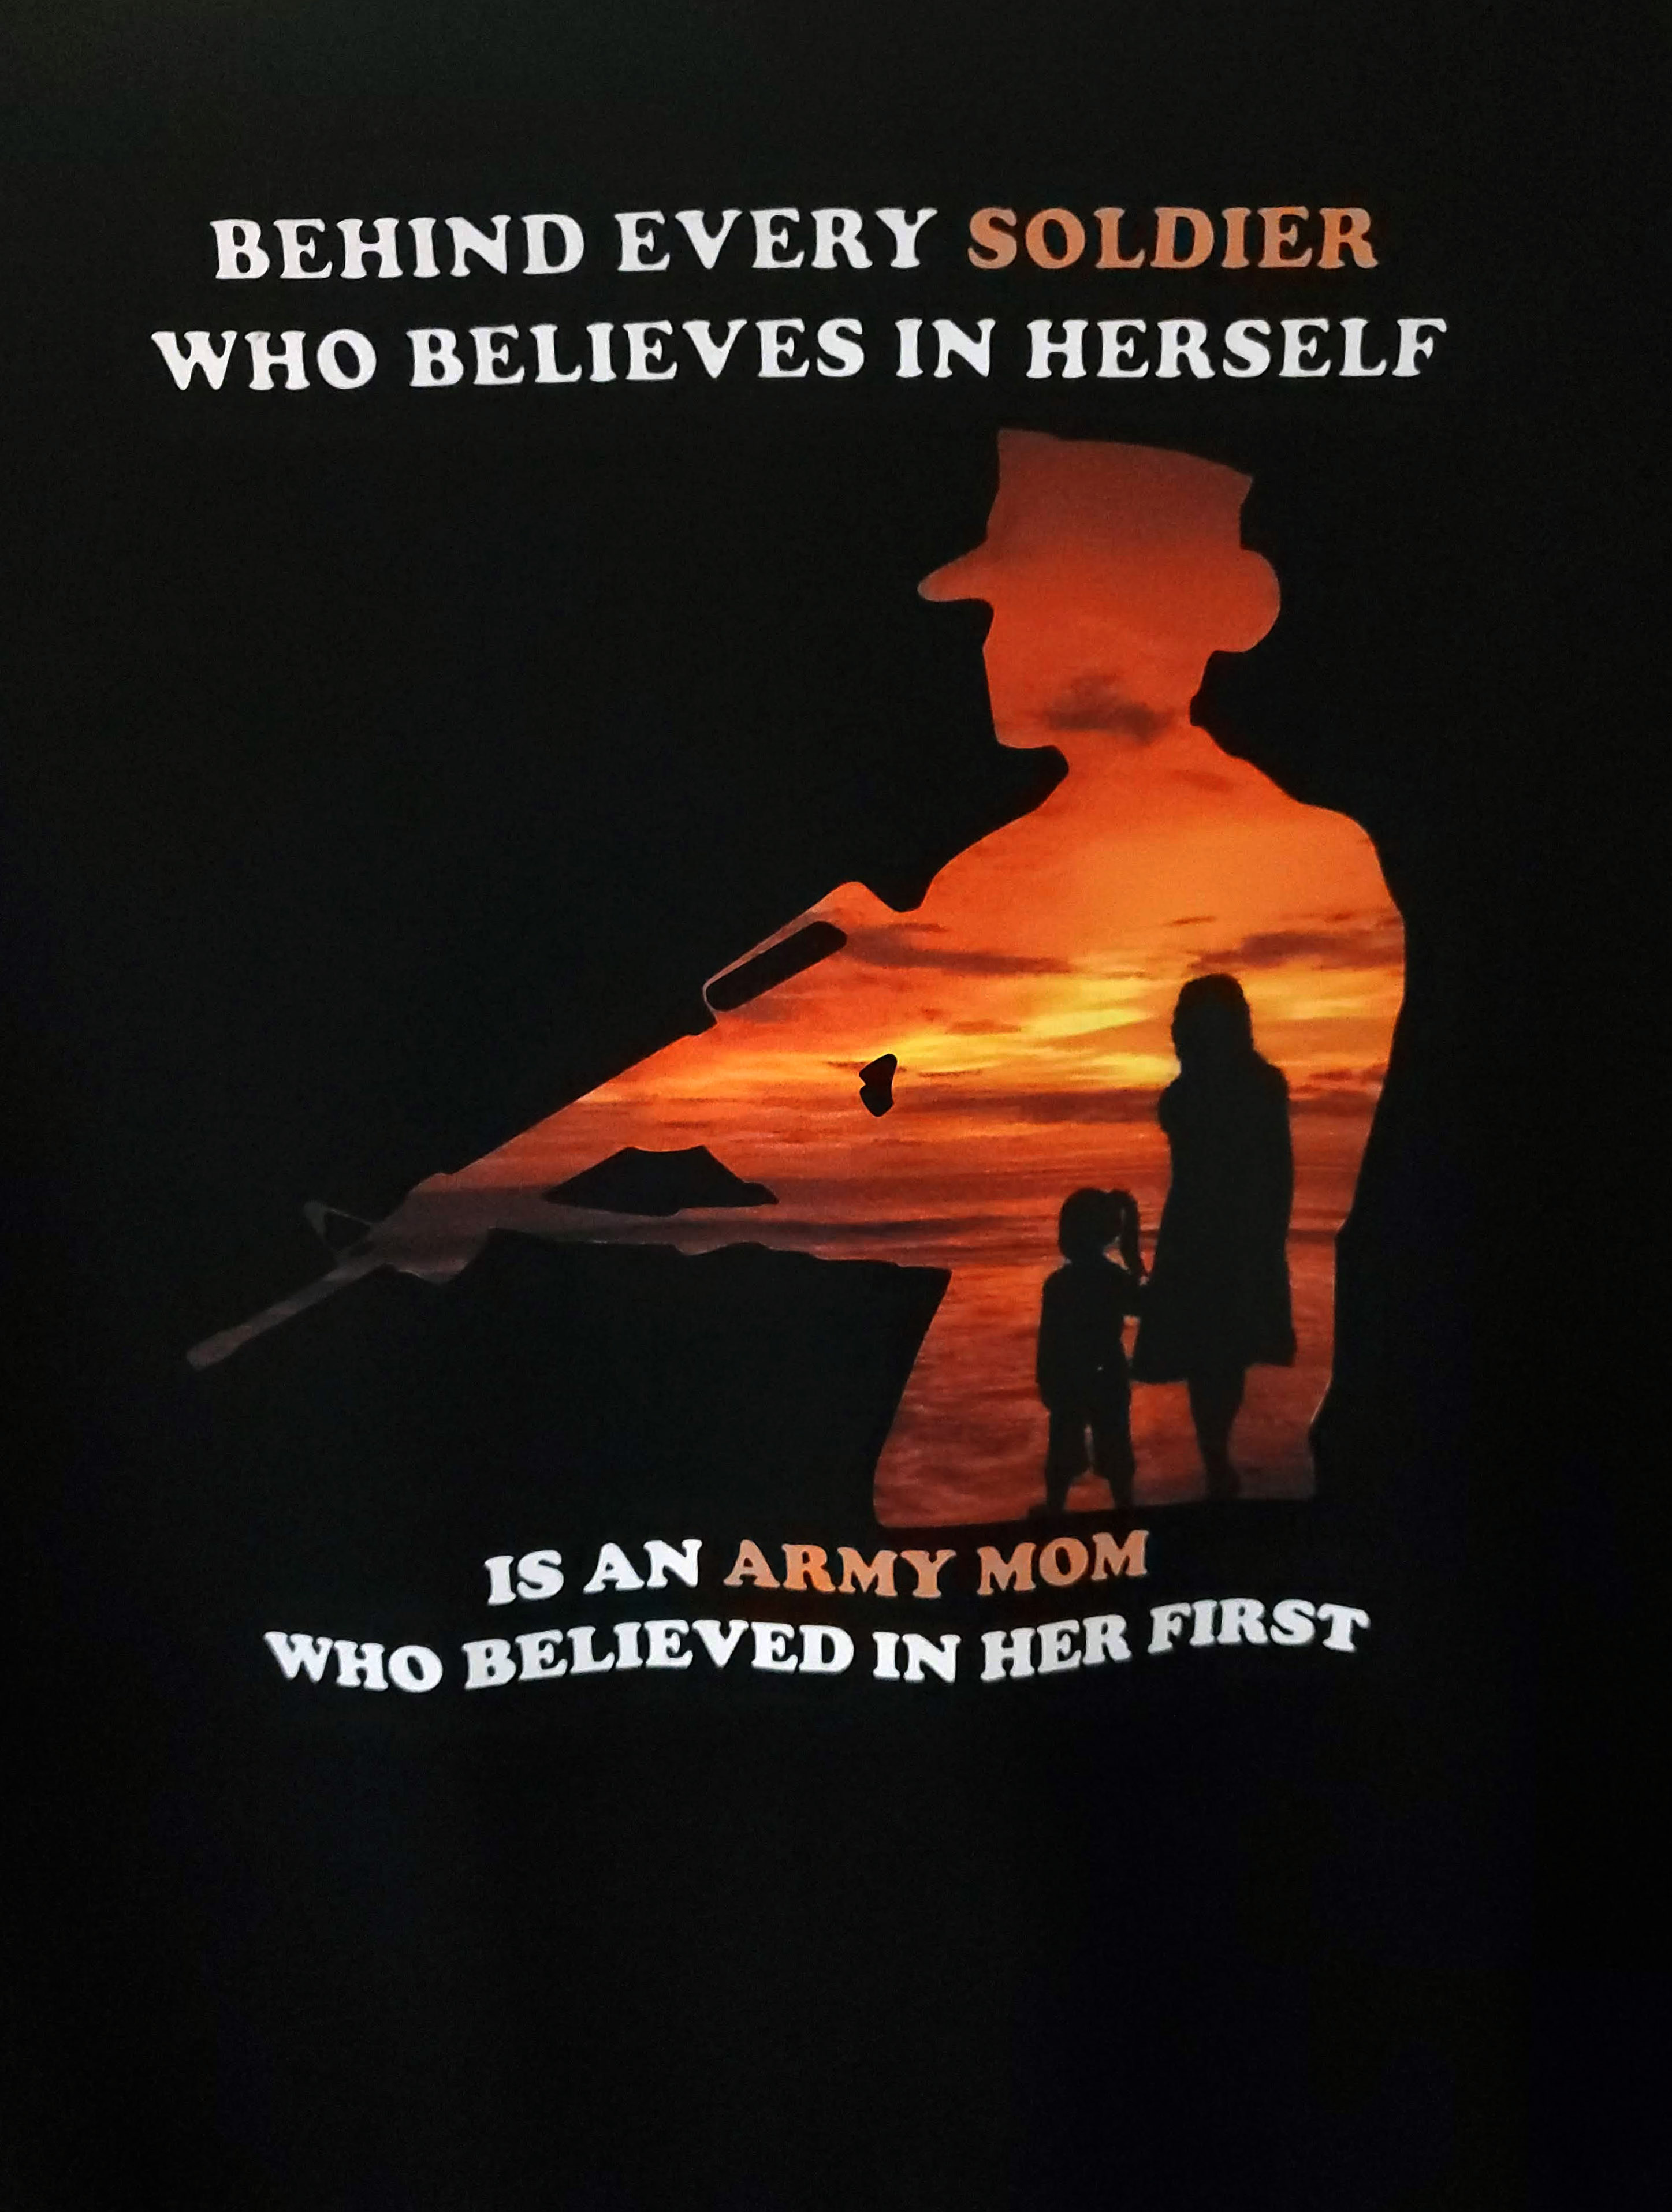 Believe in Her Army Mom made with sublimation printing